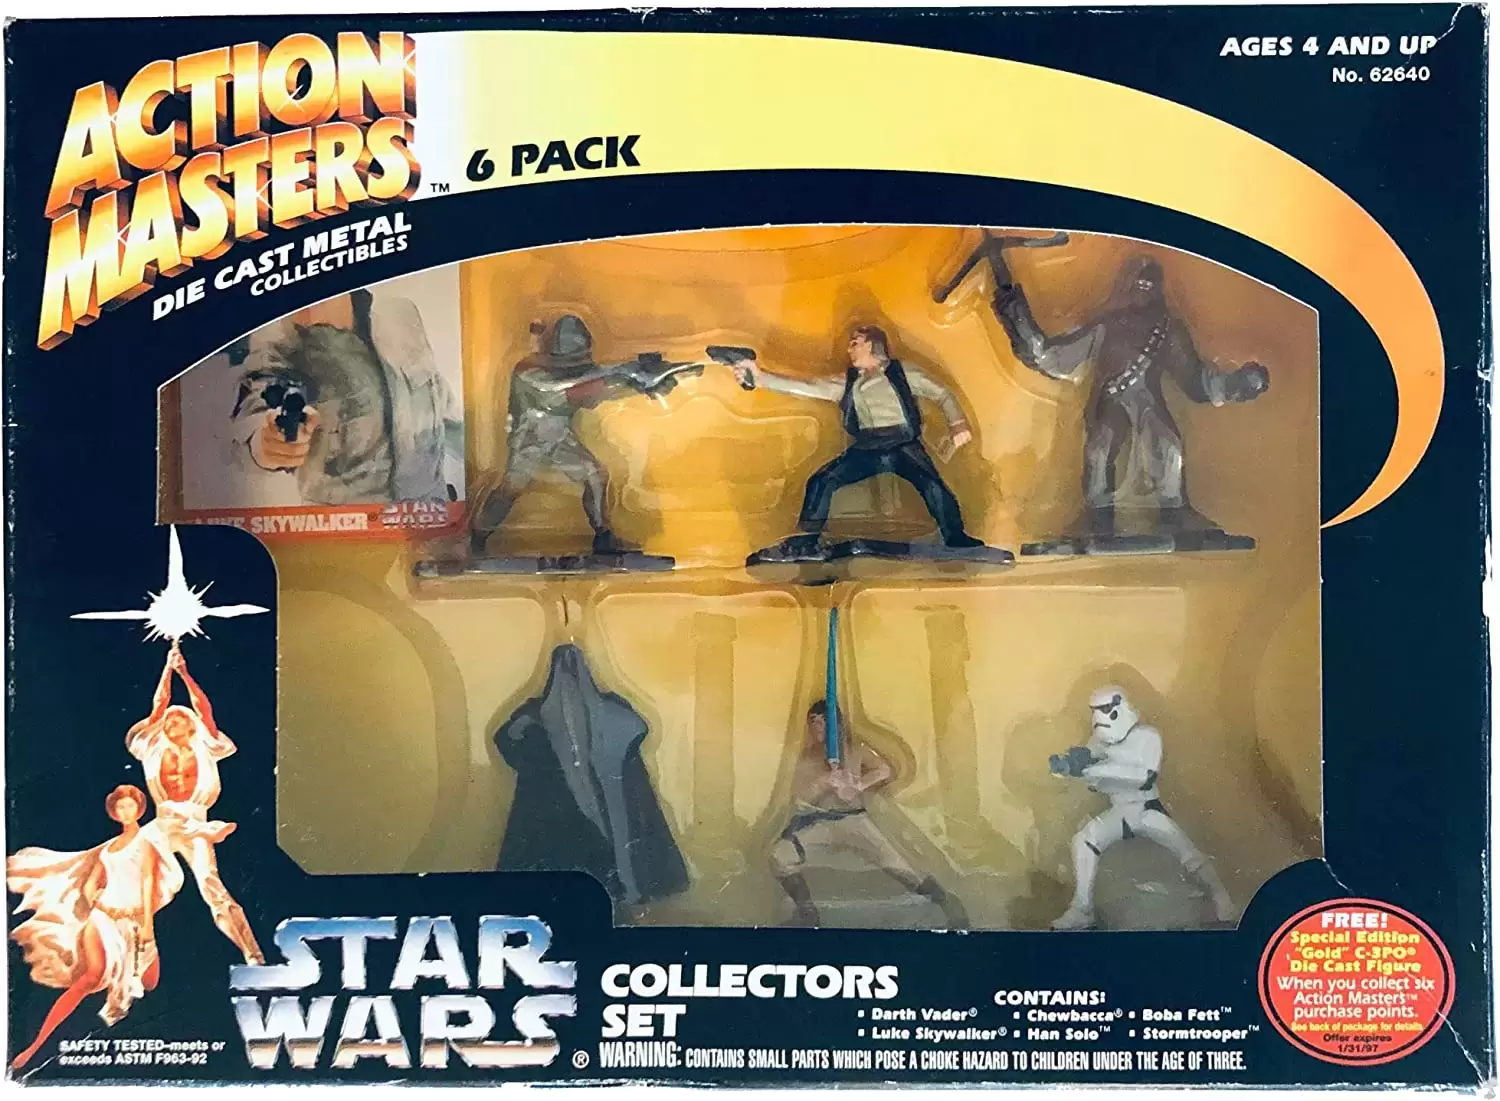 Action Masters - Die Cast Metal Collectibles - Star Wars - Collector Set 6 Pack